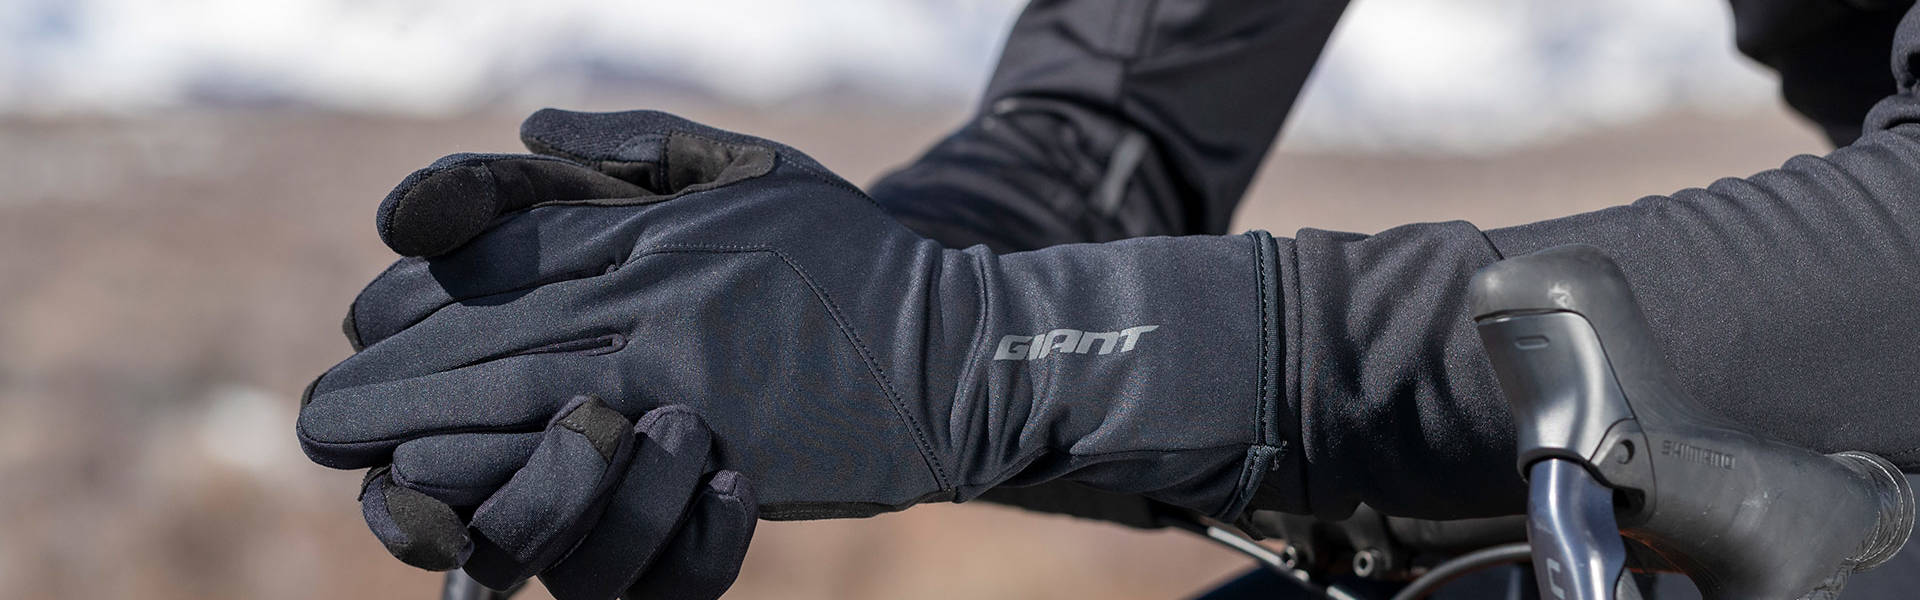 Gloves  Giant Bicycles Canada